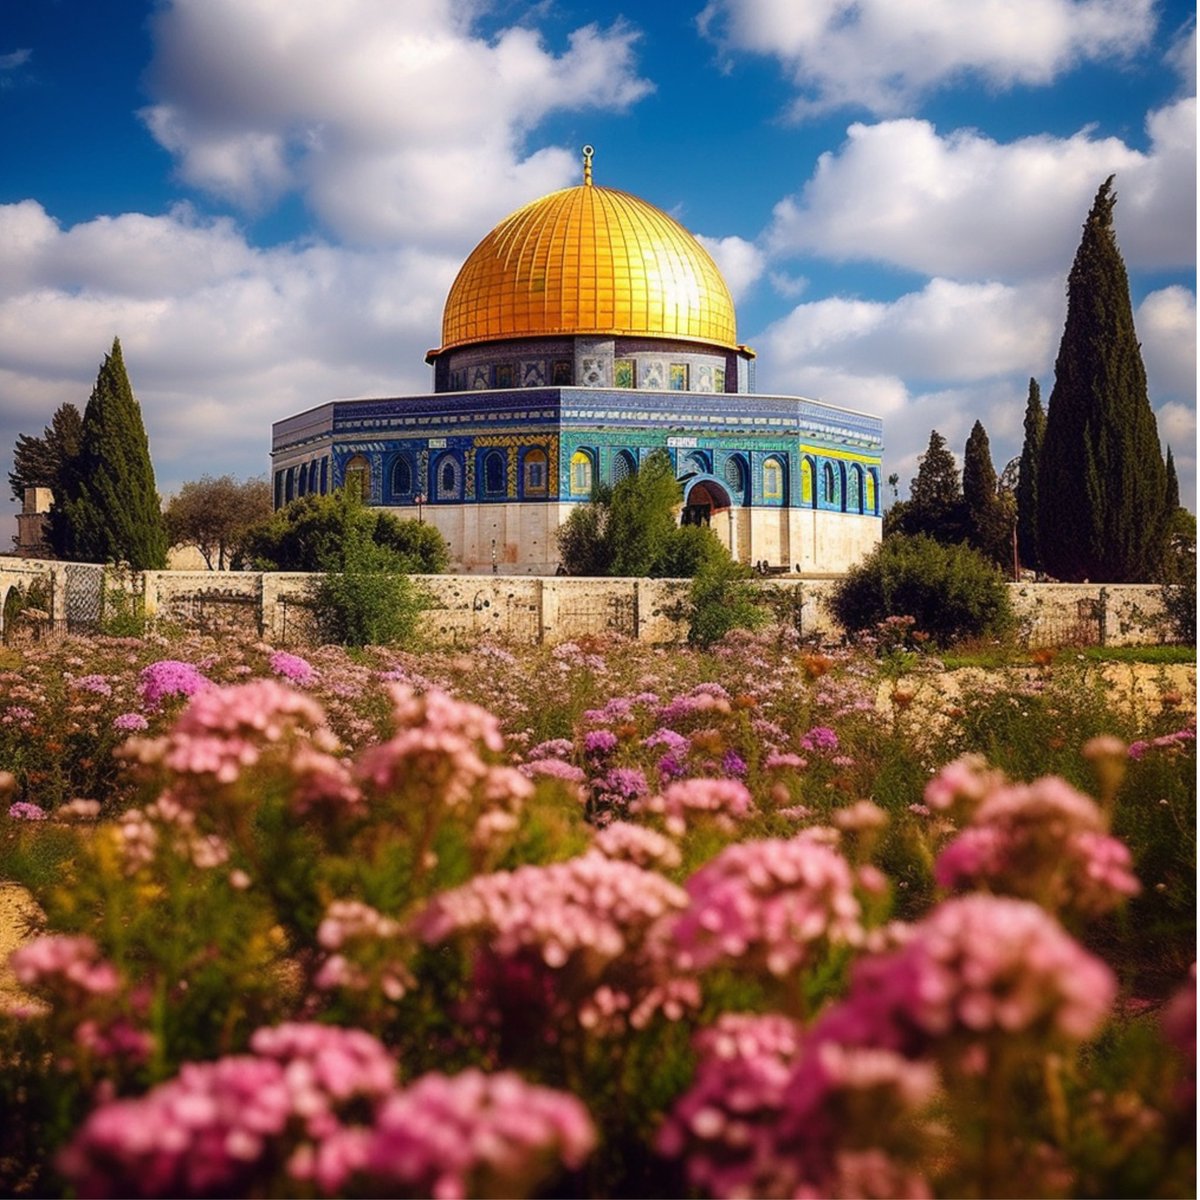 Dome of the Rock surrounded by flowers via Midjourney #Palestine #alaqsa #domeoftherock #islamicart #islamicarchitecture #Islam #Muslim